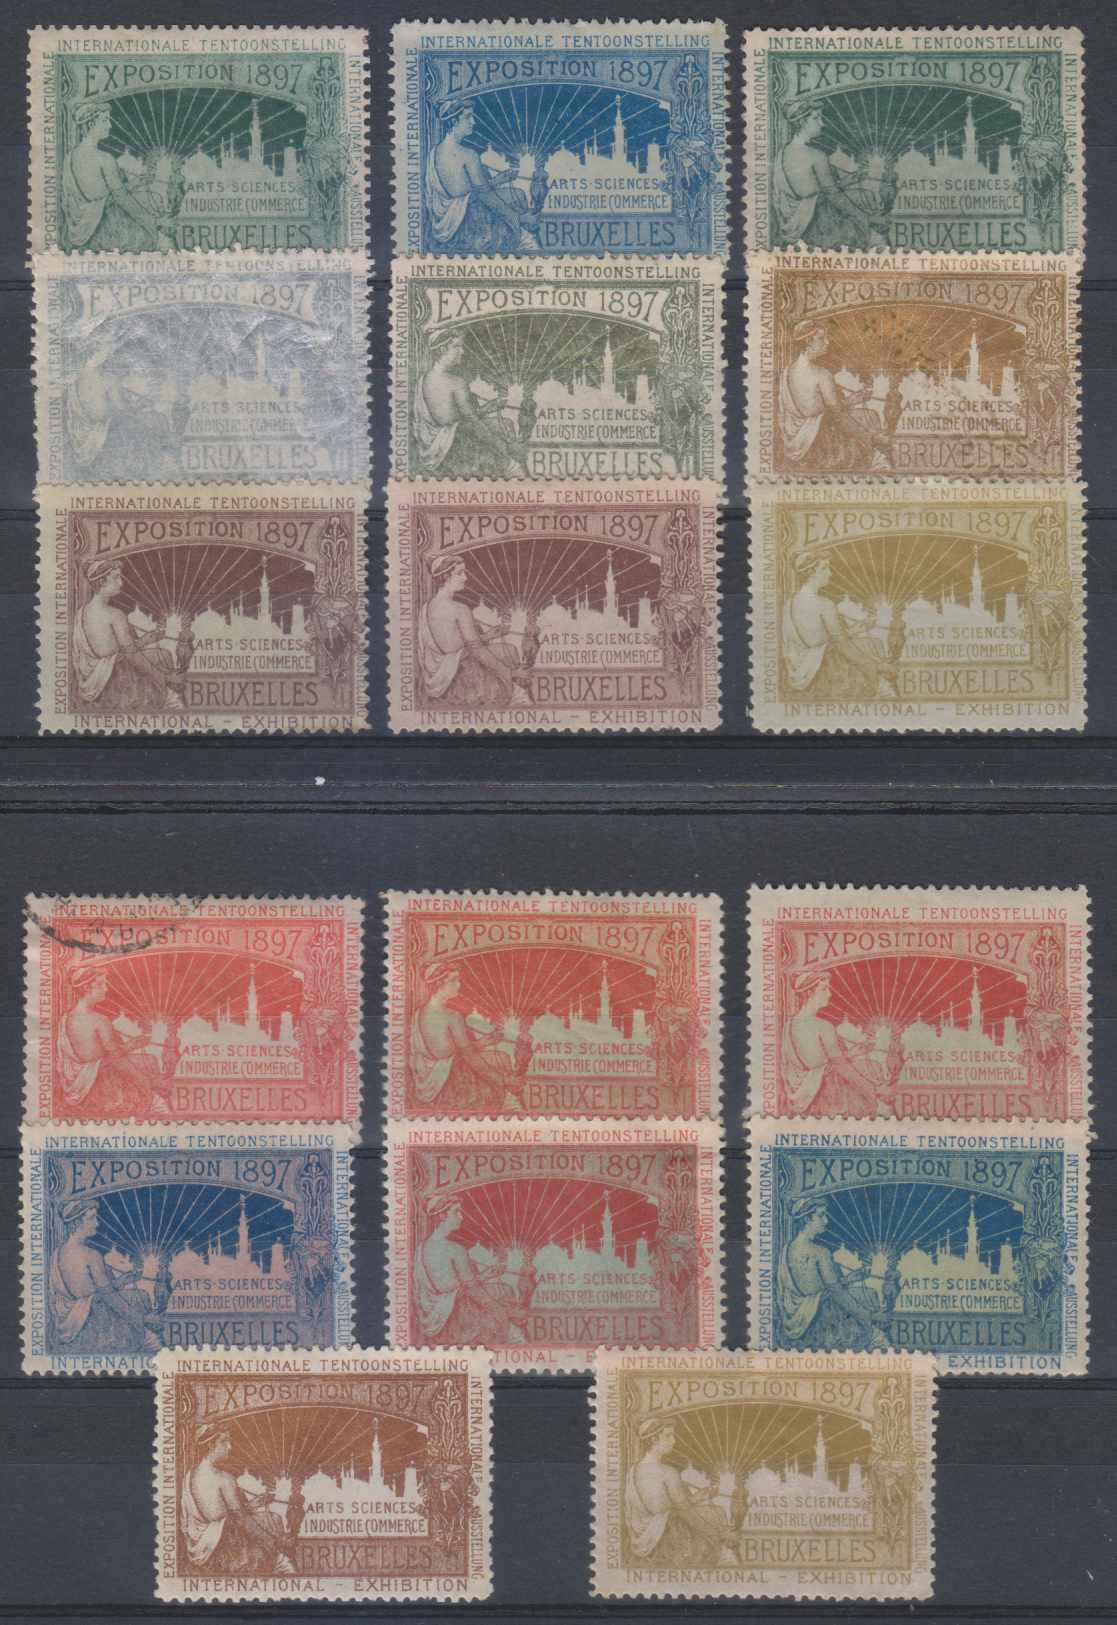 BELGIUM 1897 CINDERELLA BRUSSELS EXPOSITION 17 STAMPS MINT, MNH & USED VF